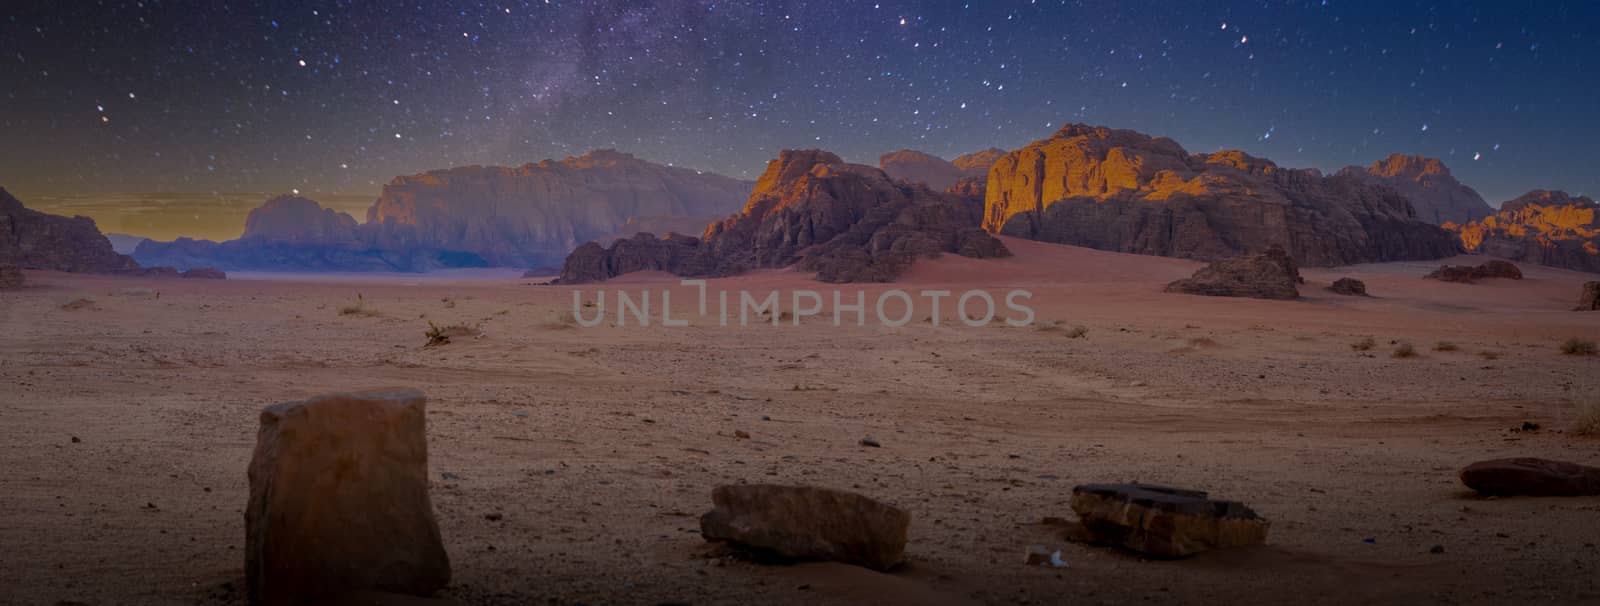 Desert and rocks on extraterrestrial or alien planet in the universe with view on space and galaxy by kb79